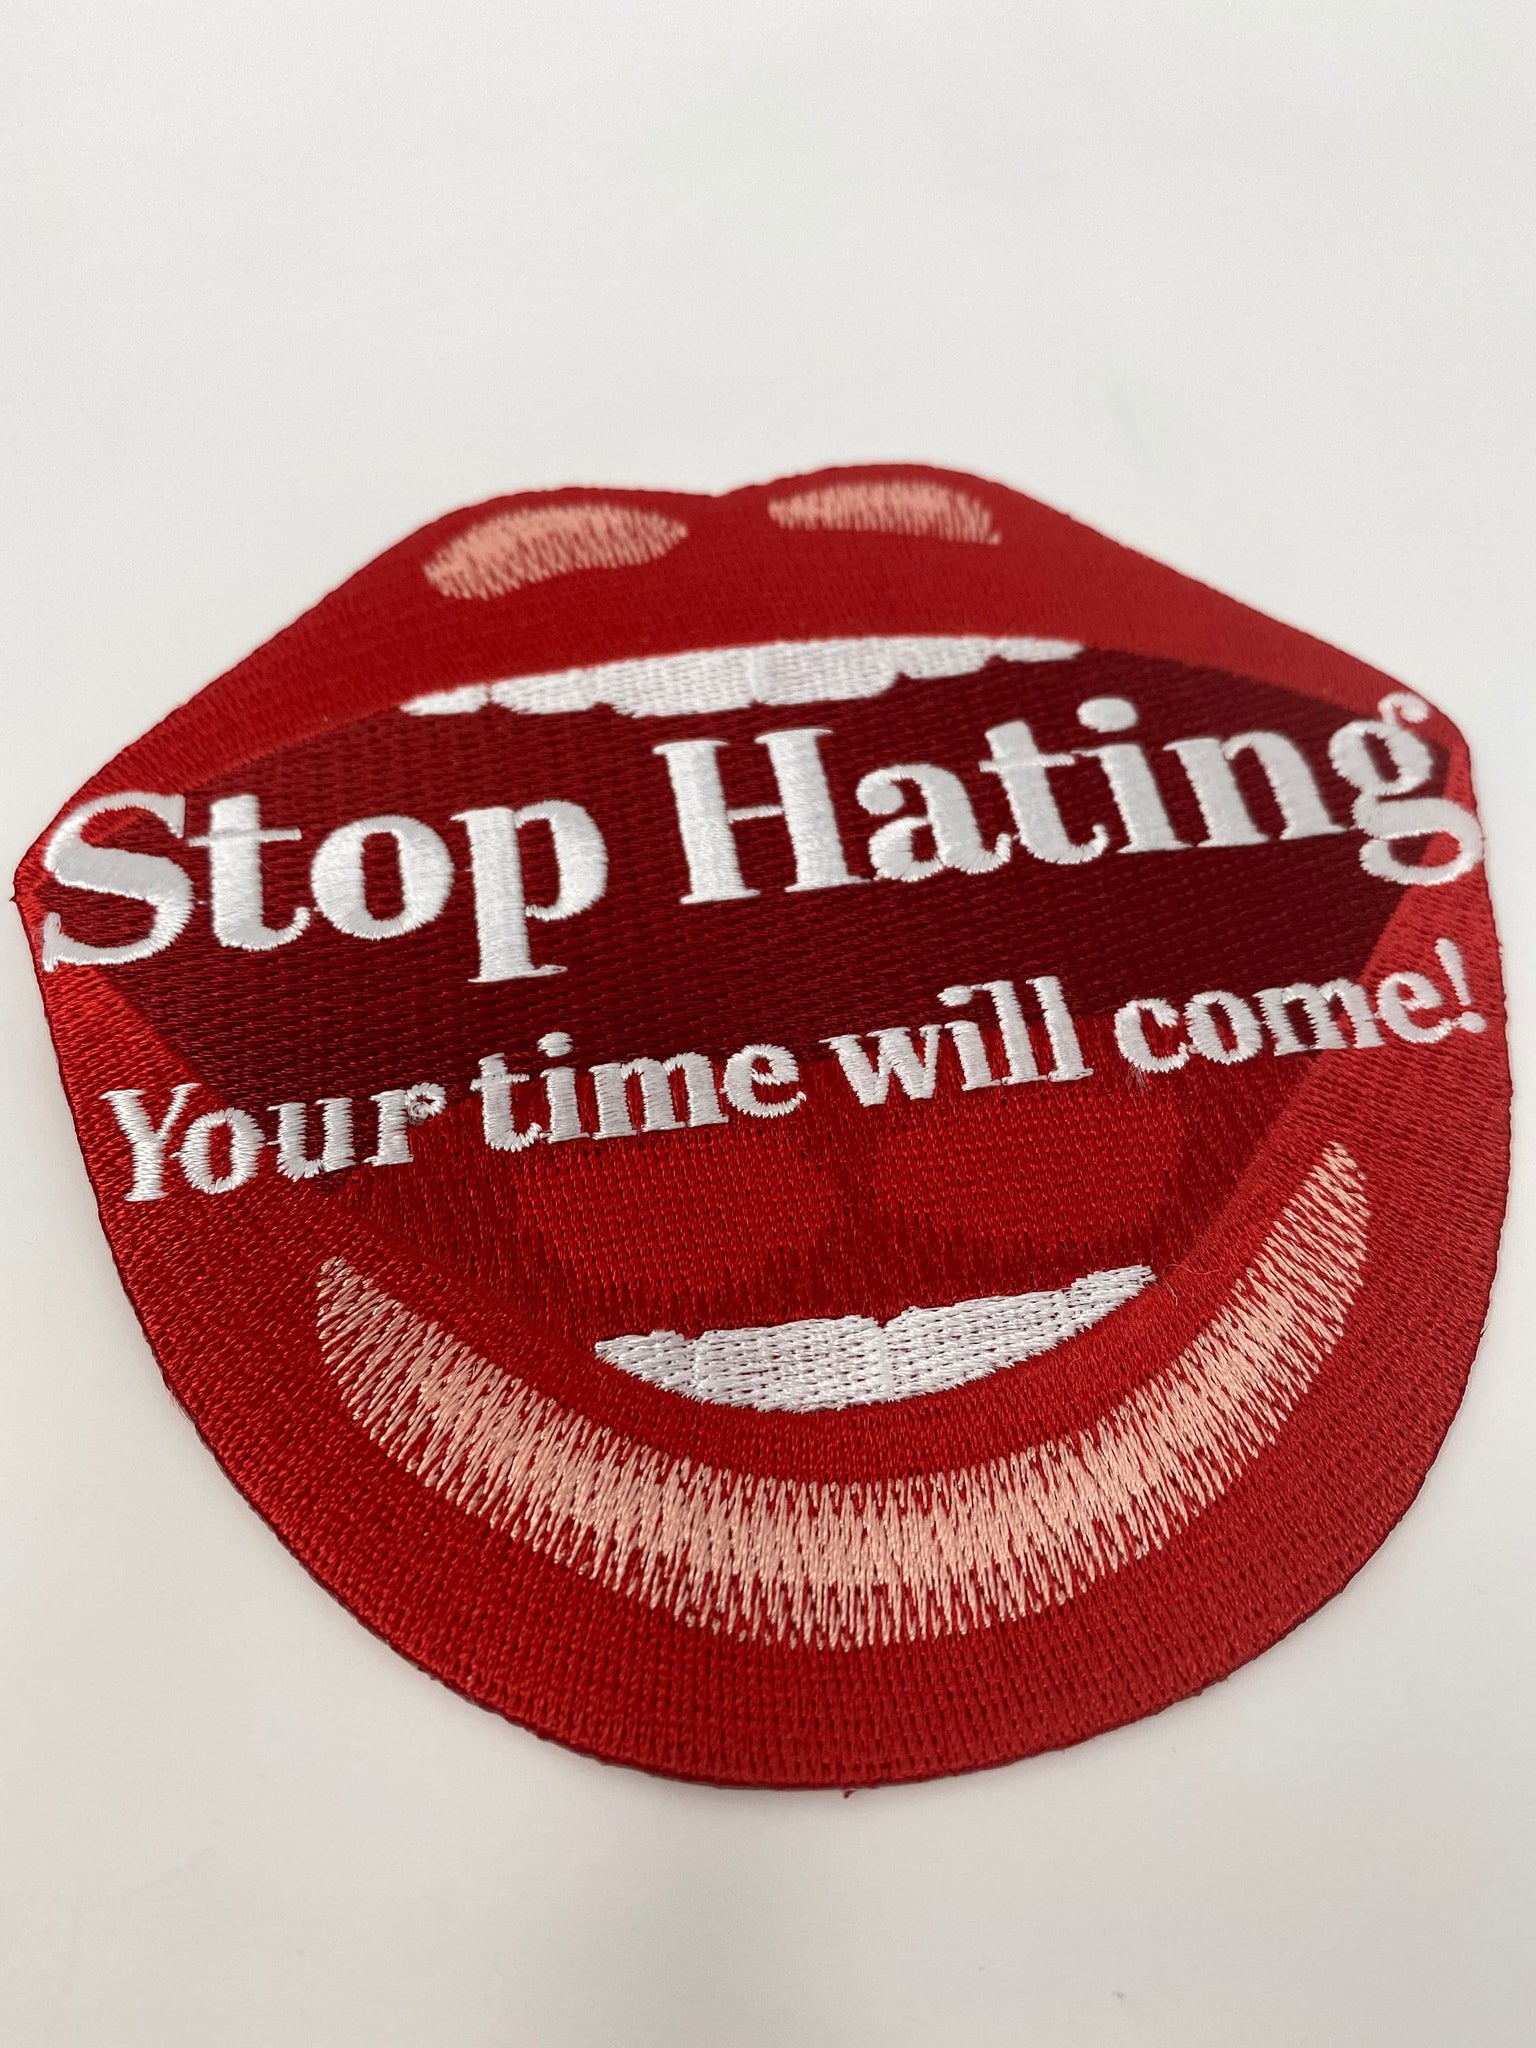 NEW, Cool 4-inch, "Stop Hating.." iron on patch, DIY, Embroidered Applique, Statement Patch for Denim Jackets